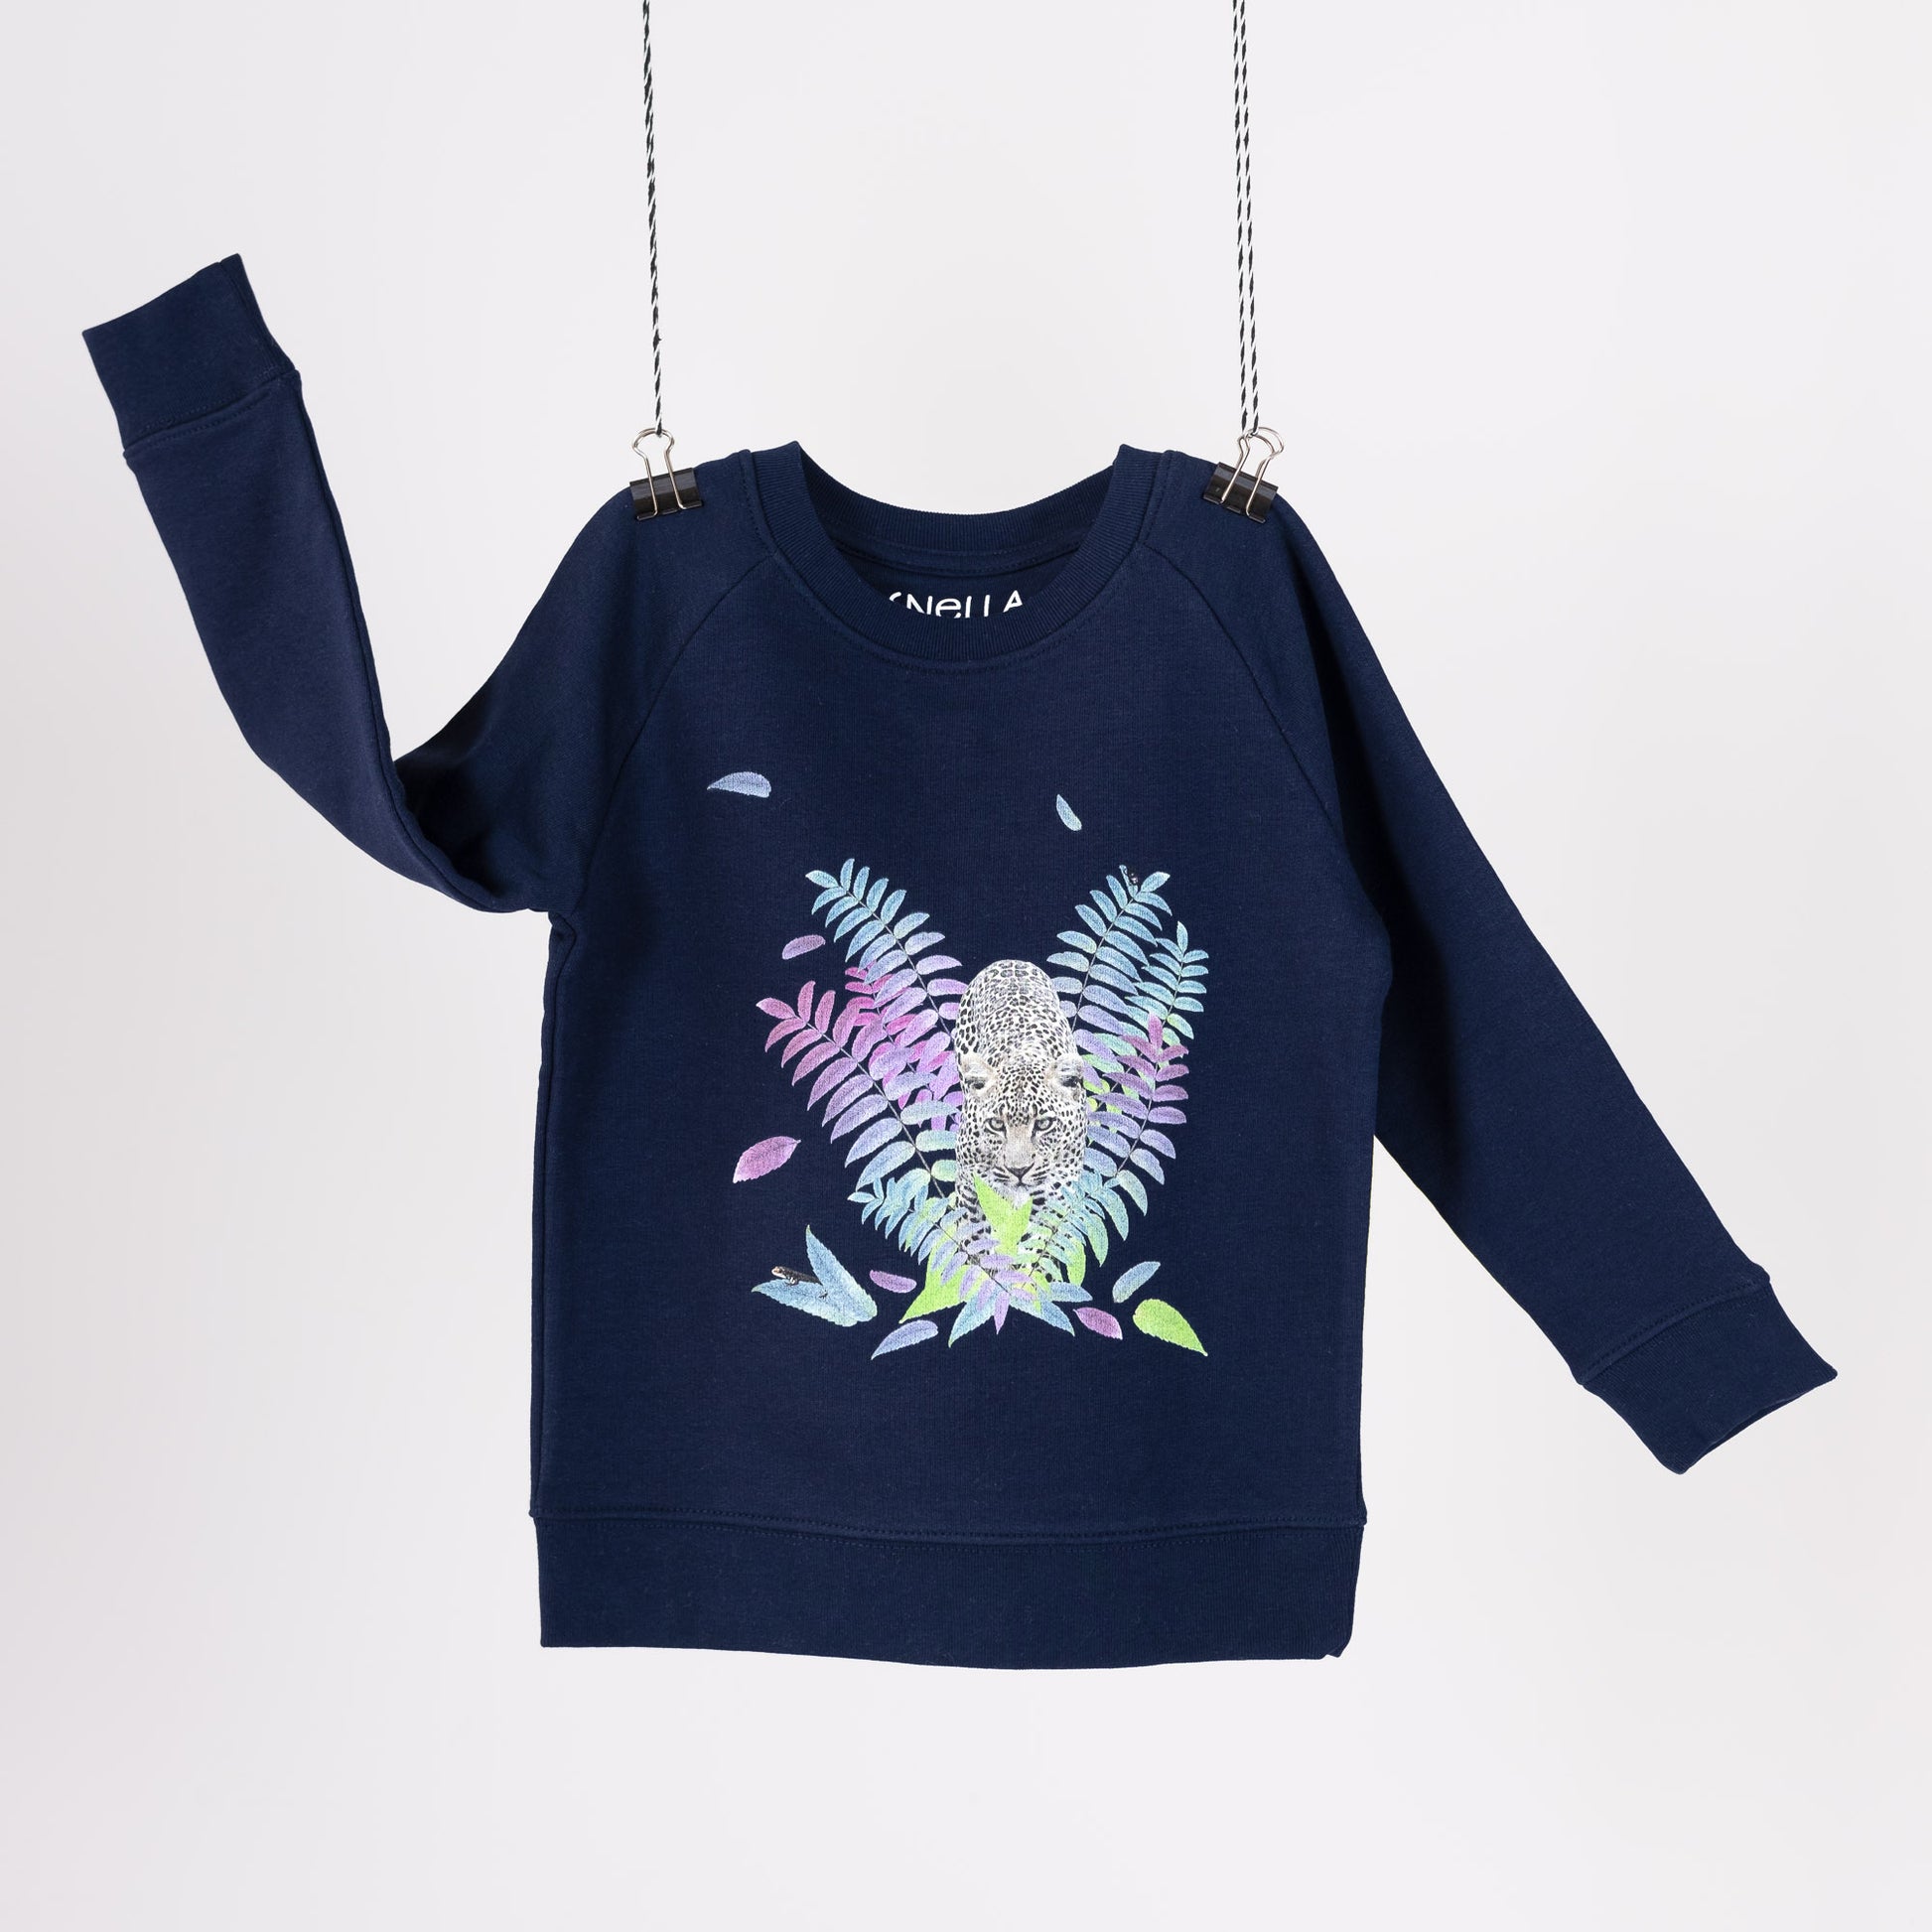 Navy blue terry children's sweatshirt featuring a digital print with a leopard and colourful foliage. Screen printed logo in the neck. Front view